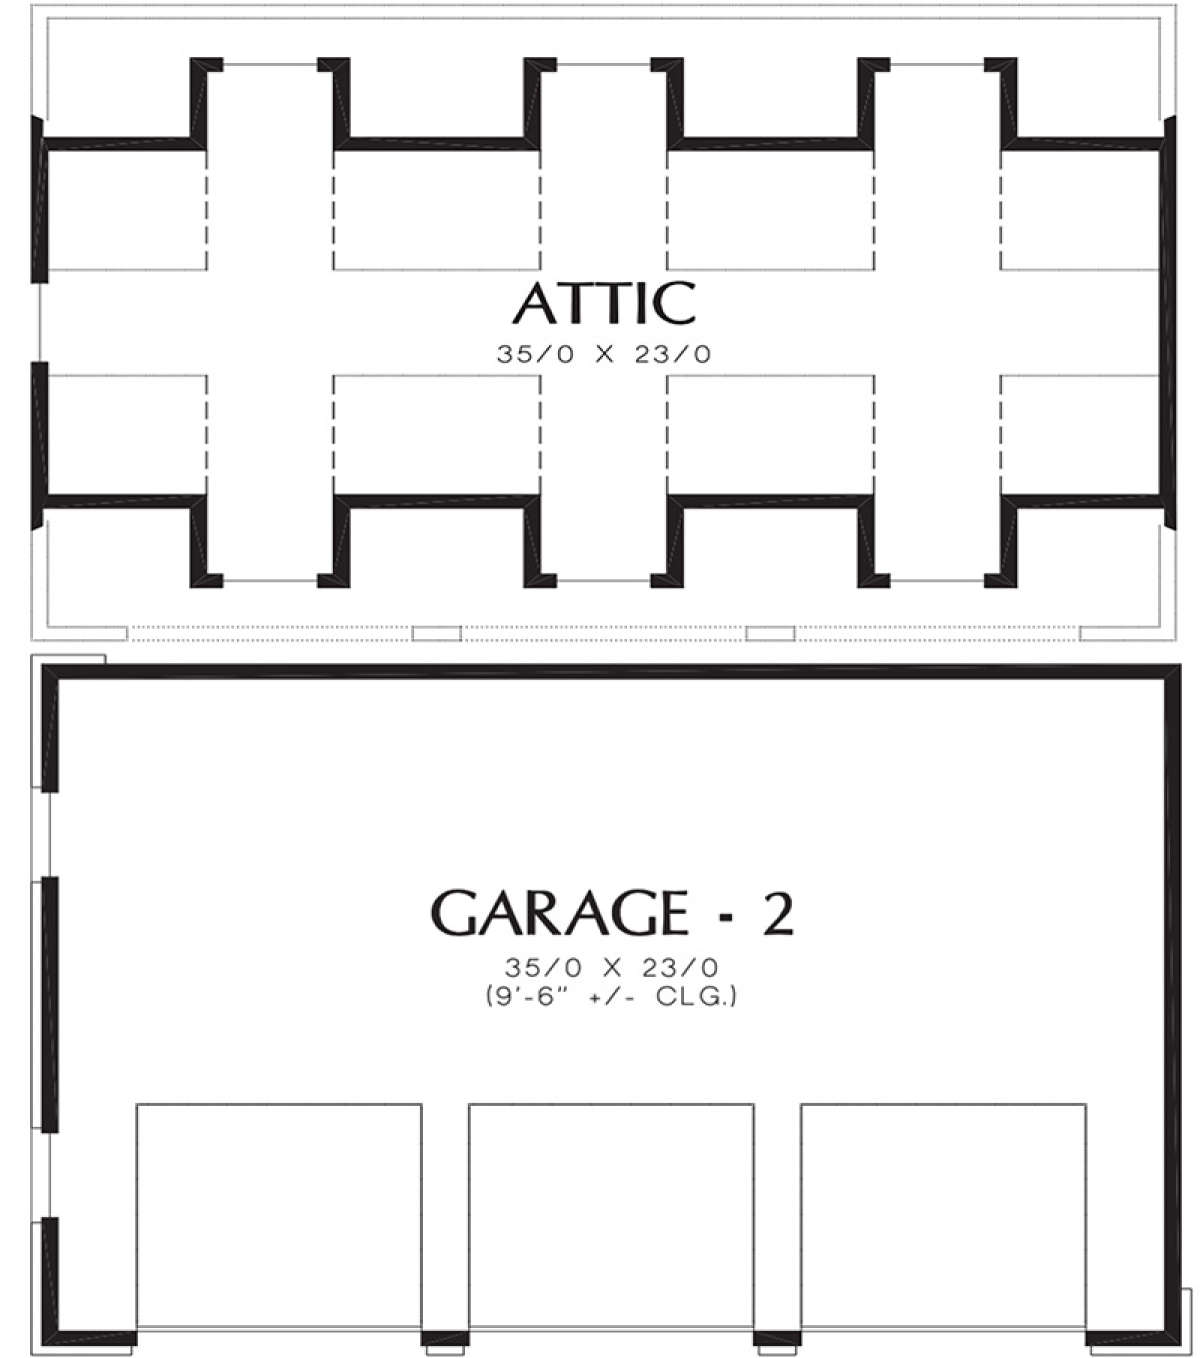 Garage and Attic for House Plan #2559-00610